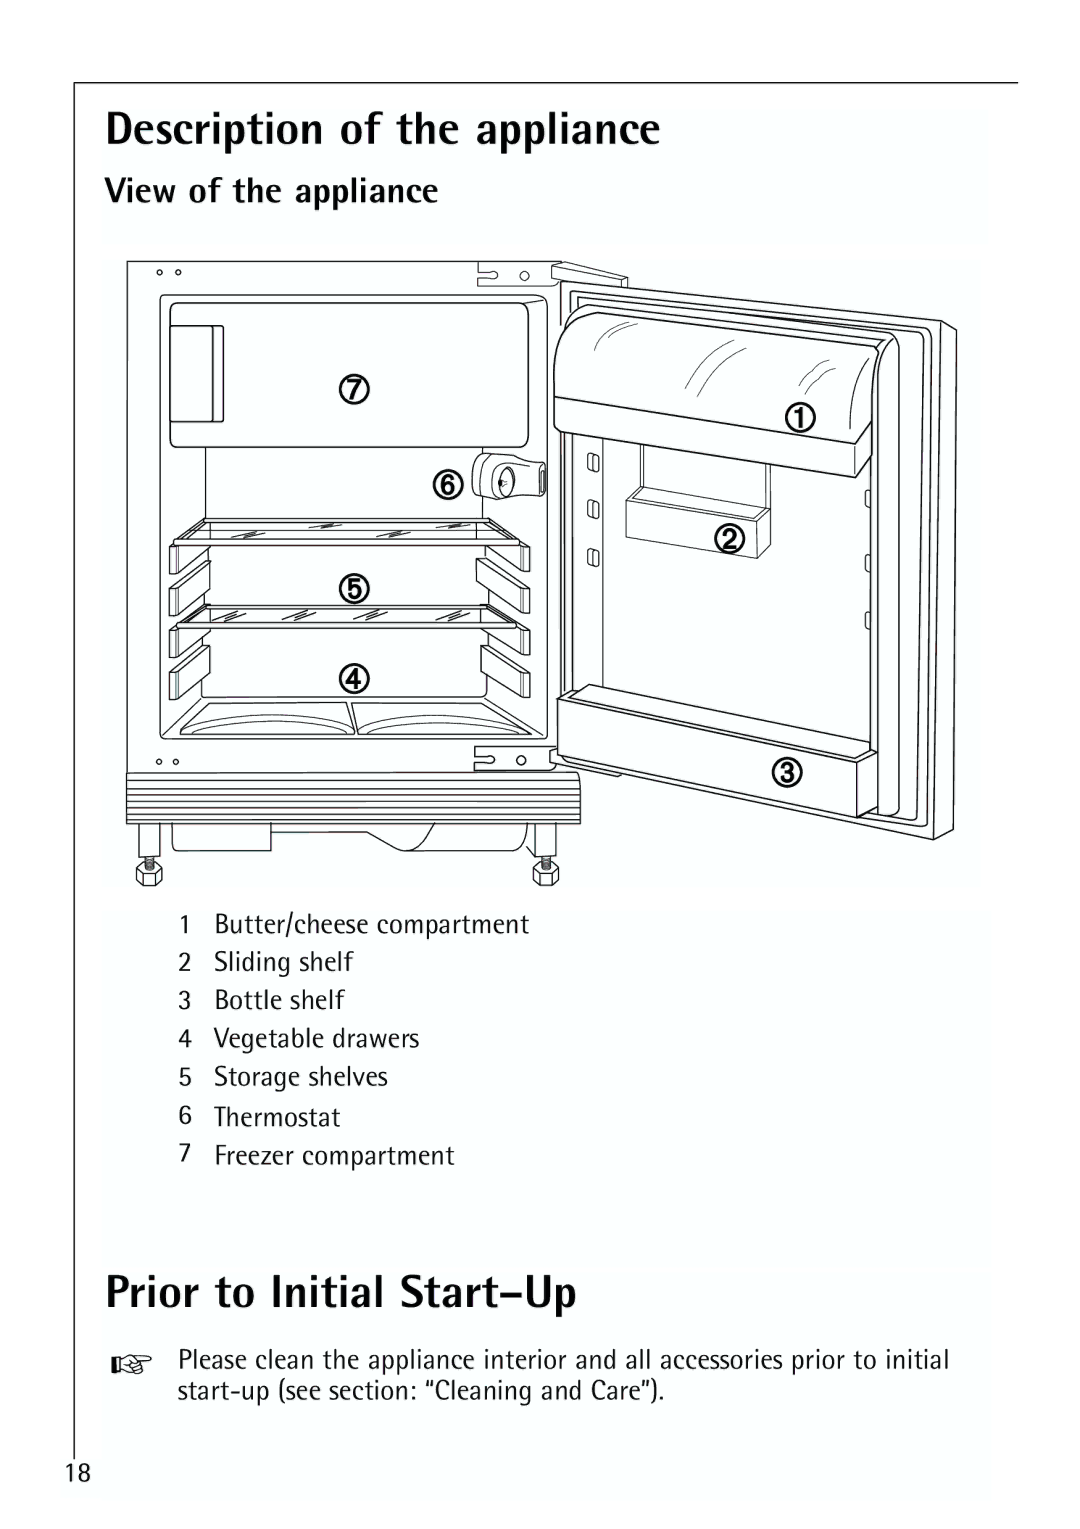 Electrolux U 96040-4 i Description of the appliance, Prior to Initial Start-Up, View of the appliance 